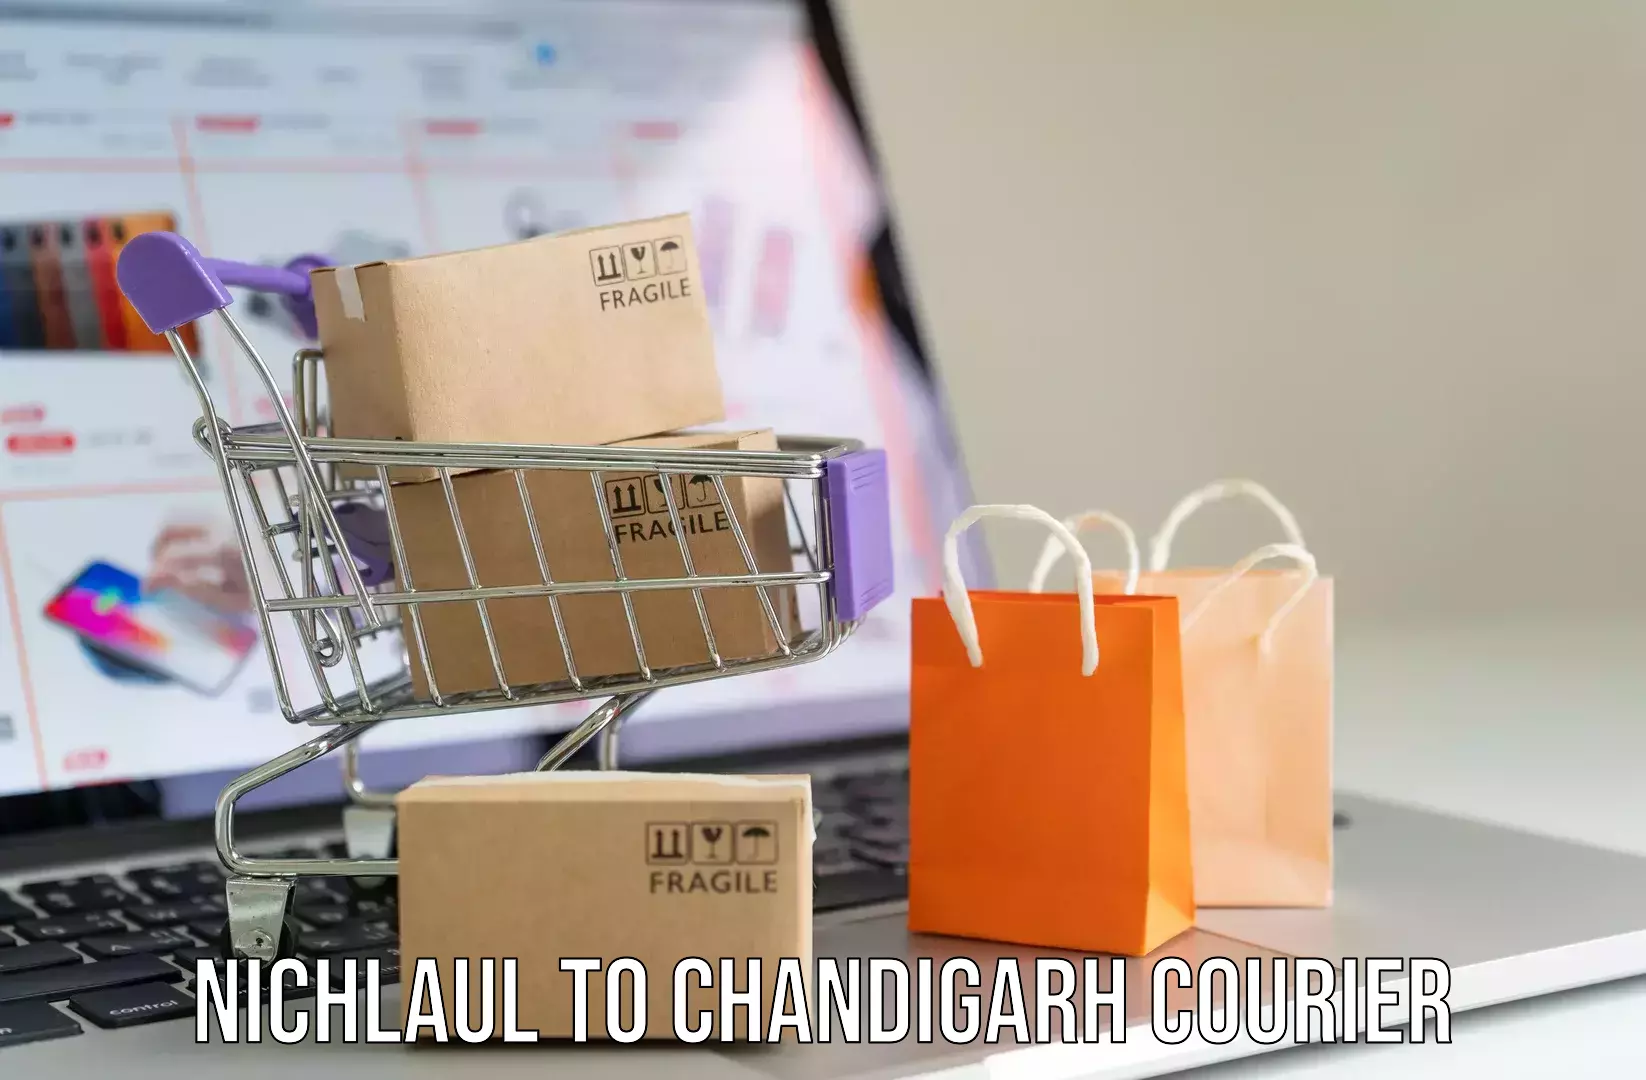 Luggage delivery system Nichlaul to Chandigarh